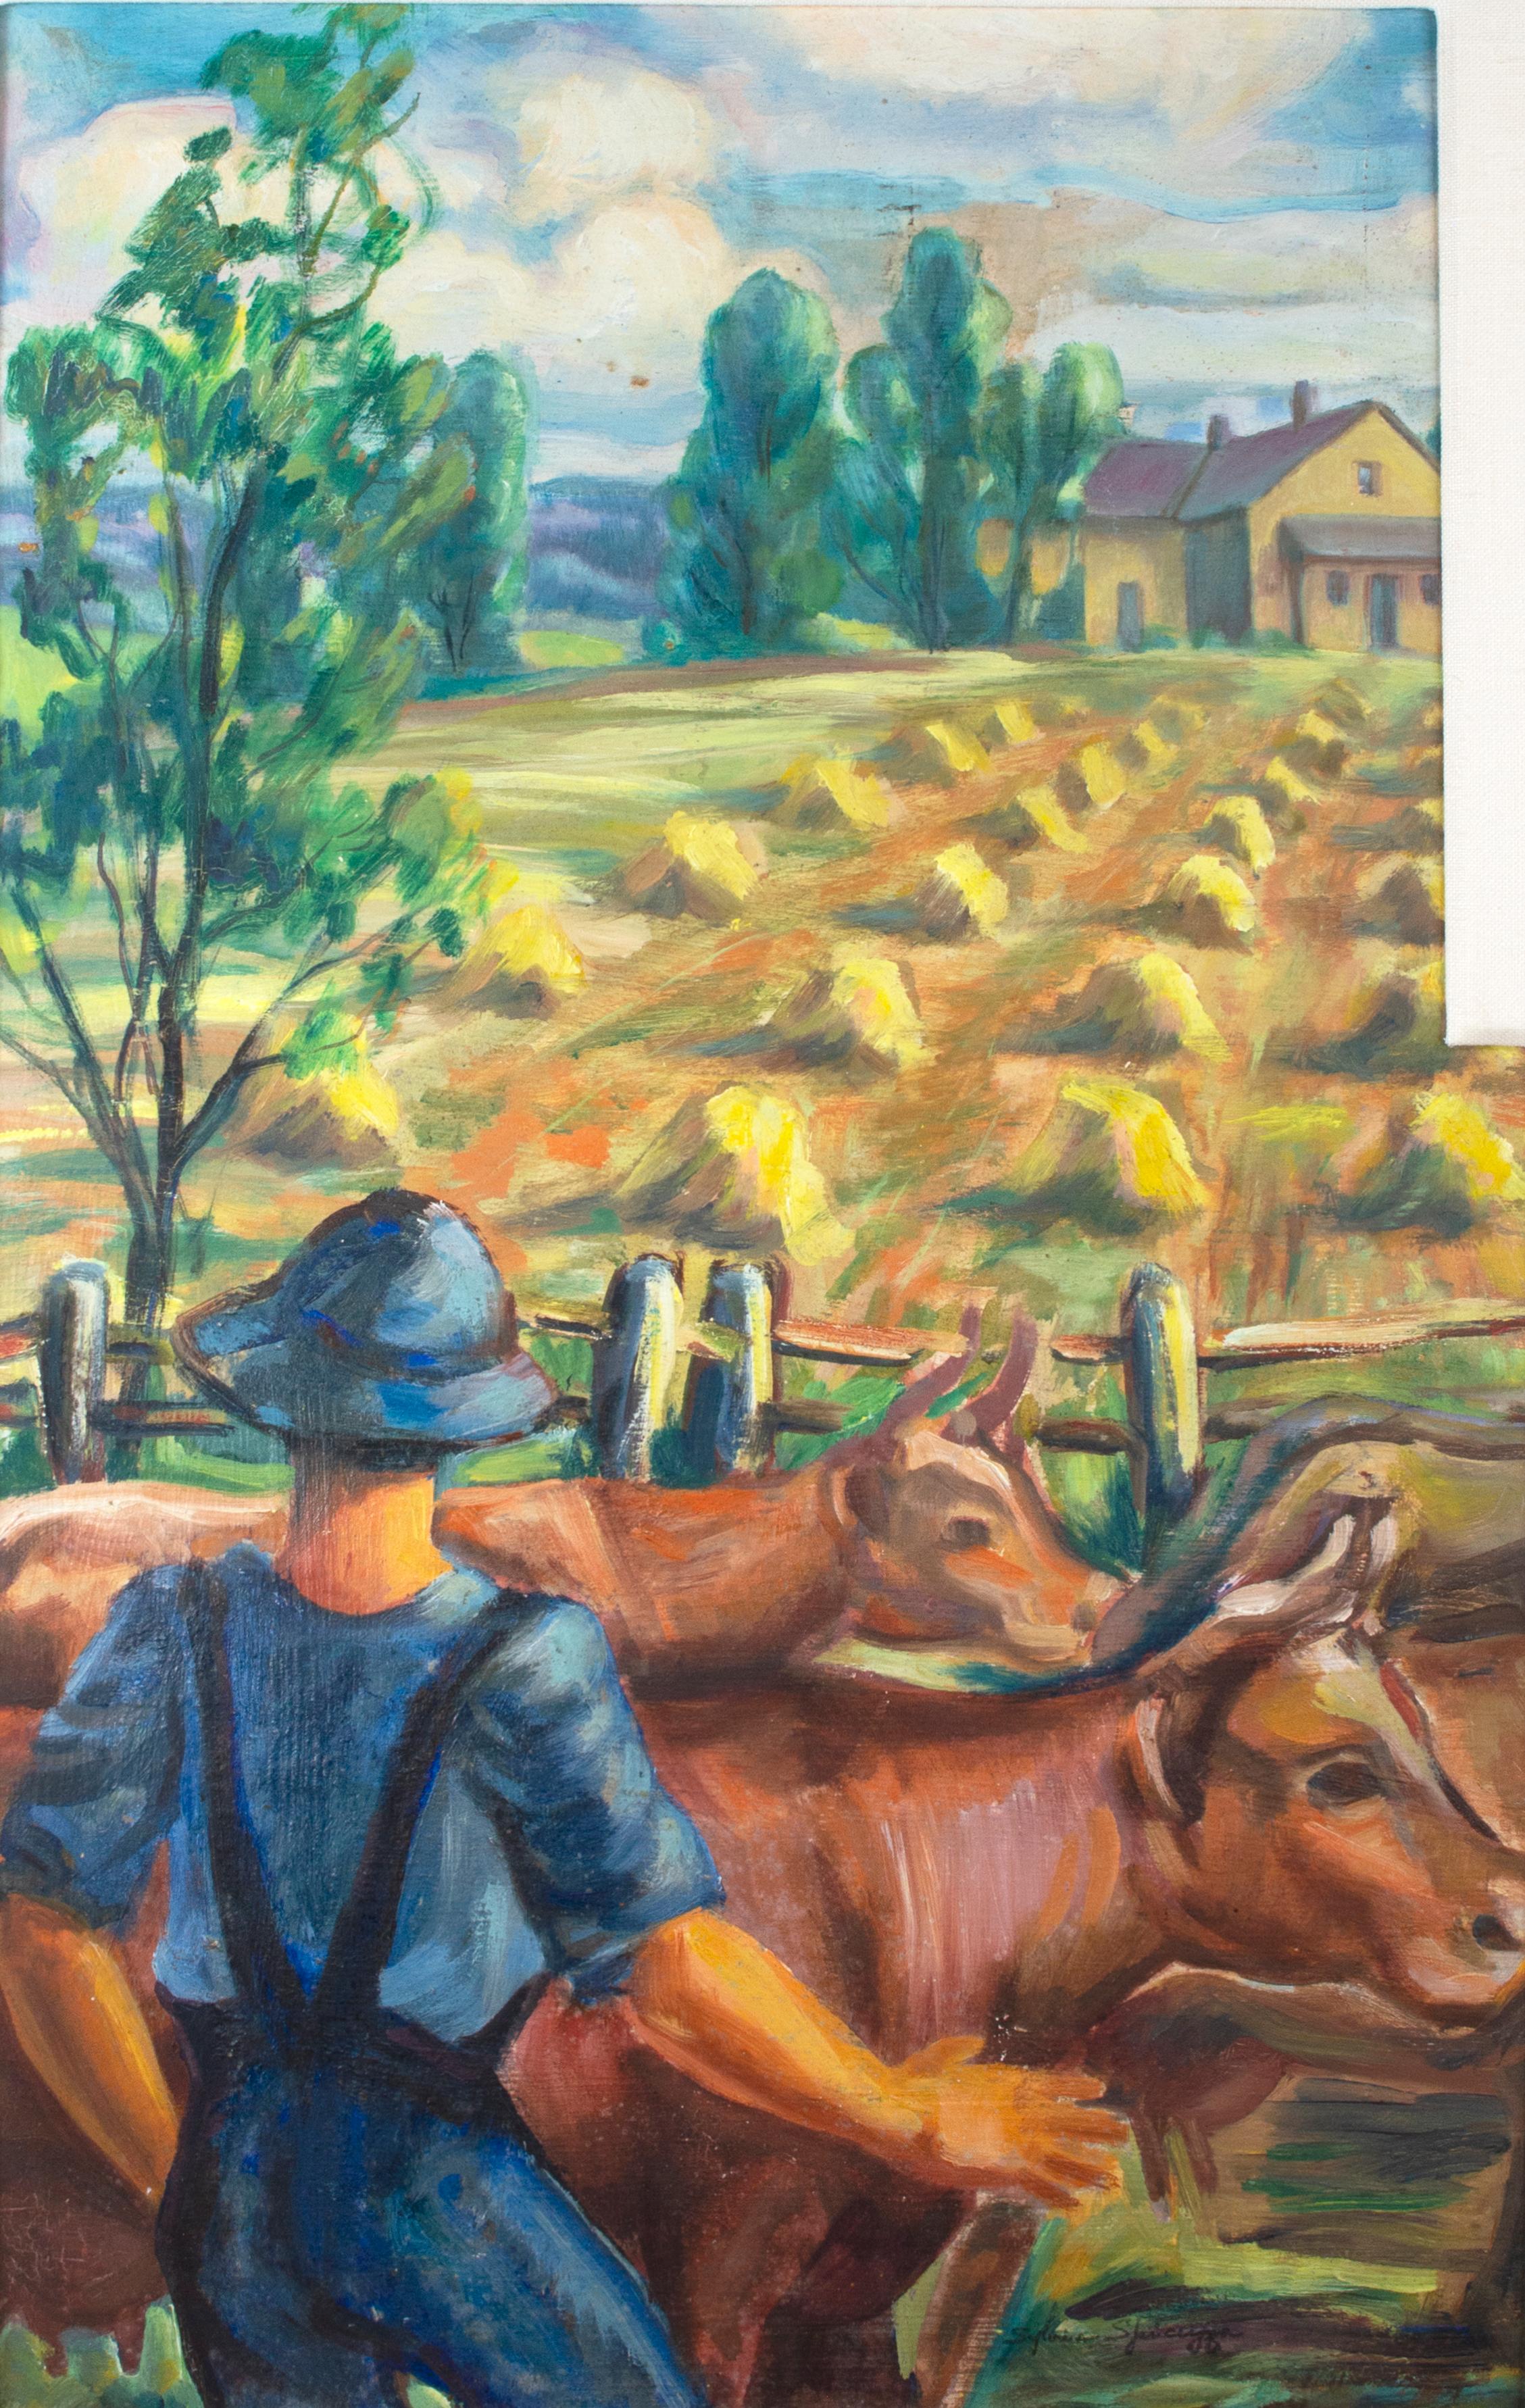 'Farmer with Cows' original Regionalist painting on board Midwestern landscape - Painting by Sylvia Spicuzza